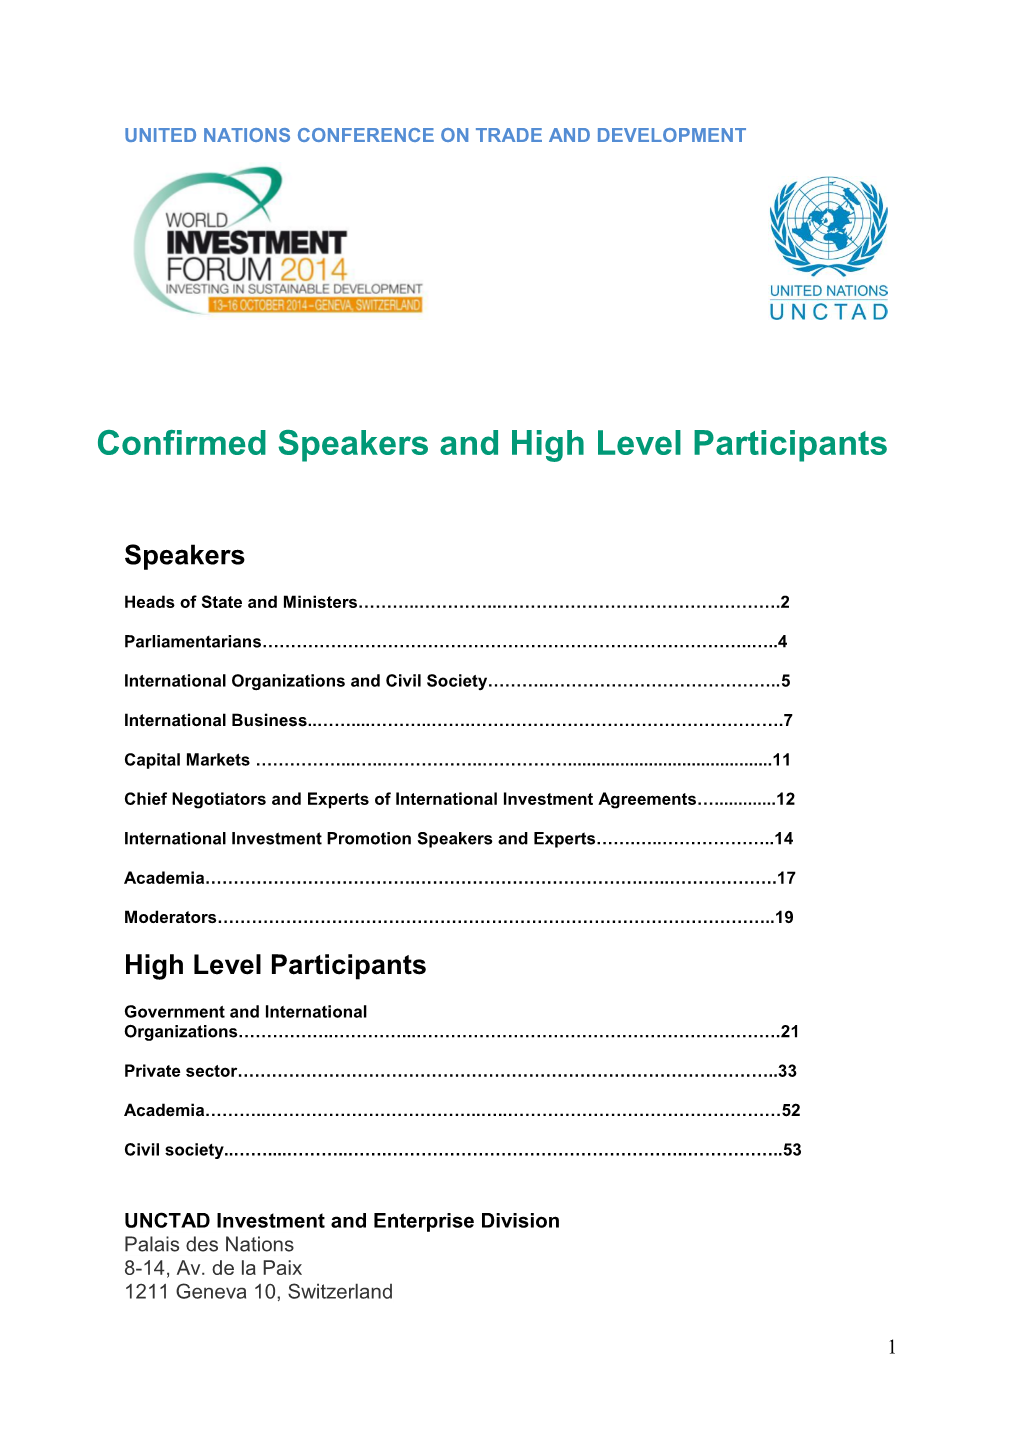 Confirmed Speakers and High Level Participants